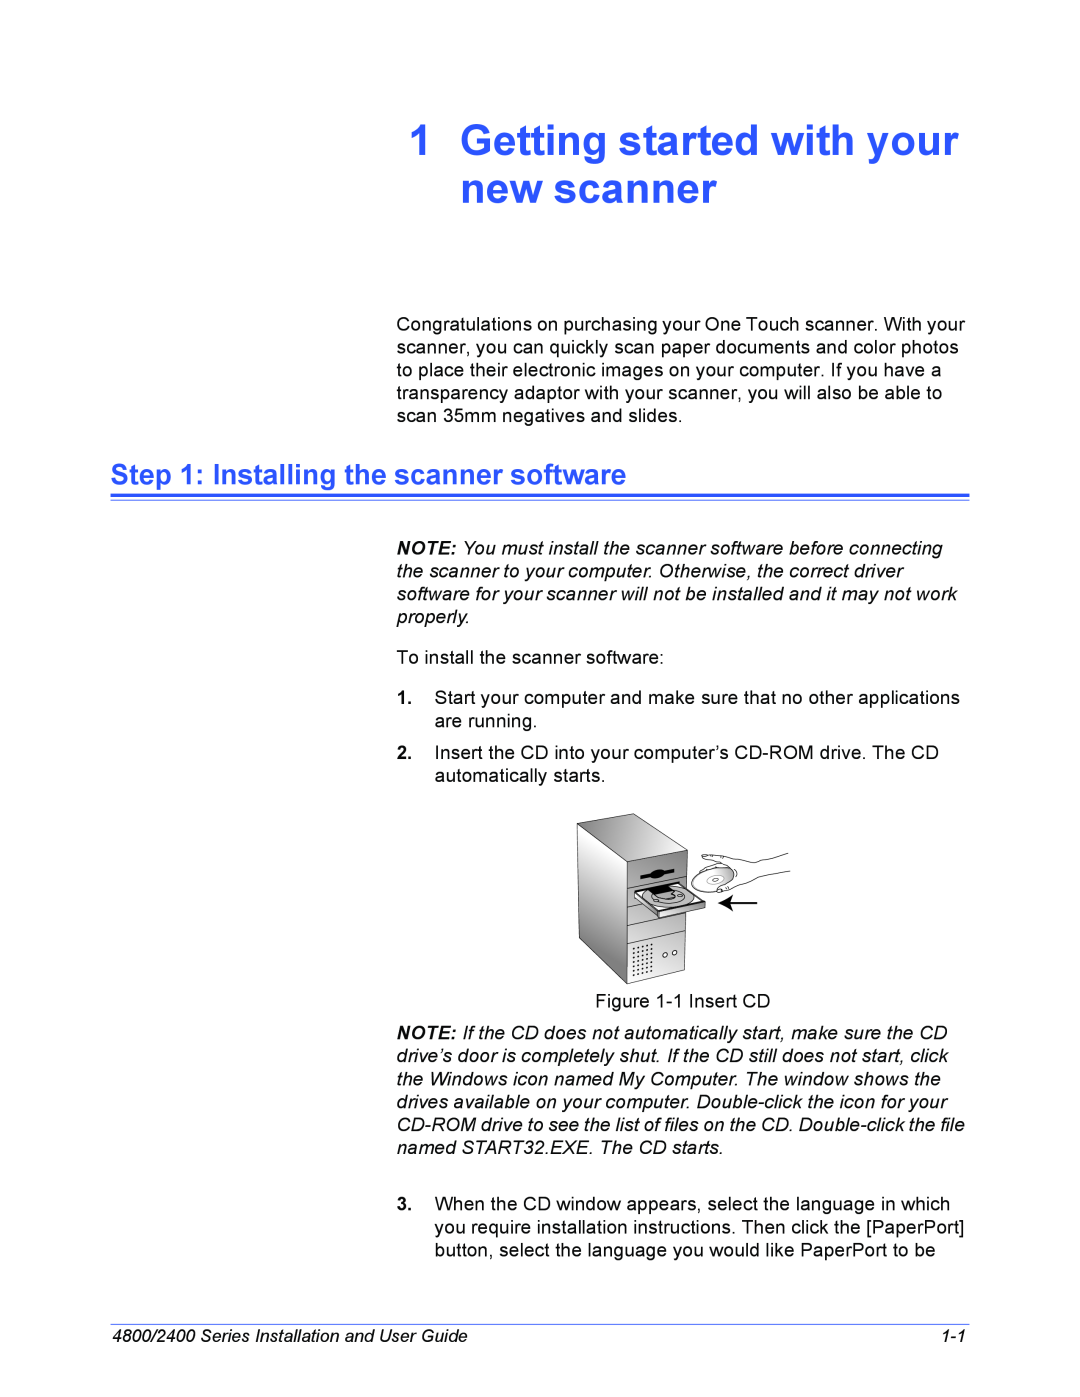 Xerox 2400, 4800 manual Getting started with your new scanner, Installing the scanner software 